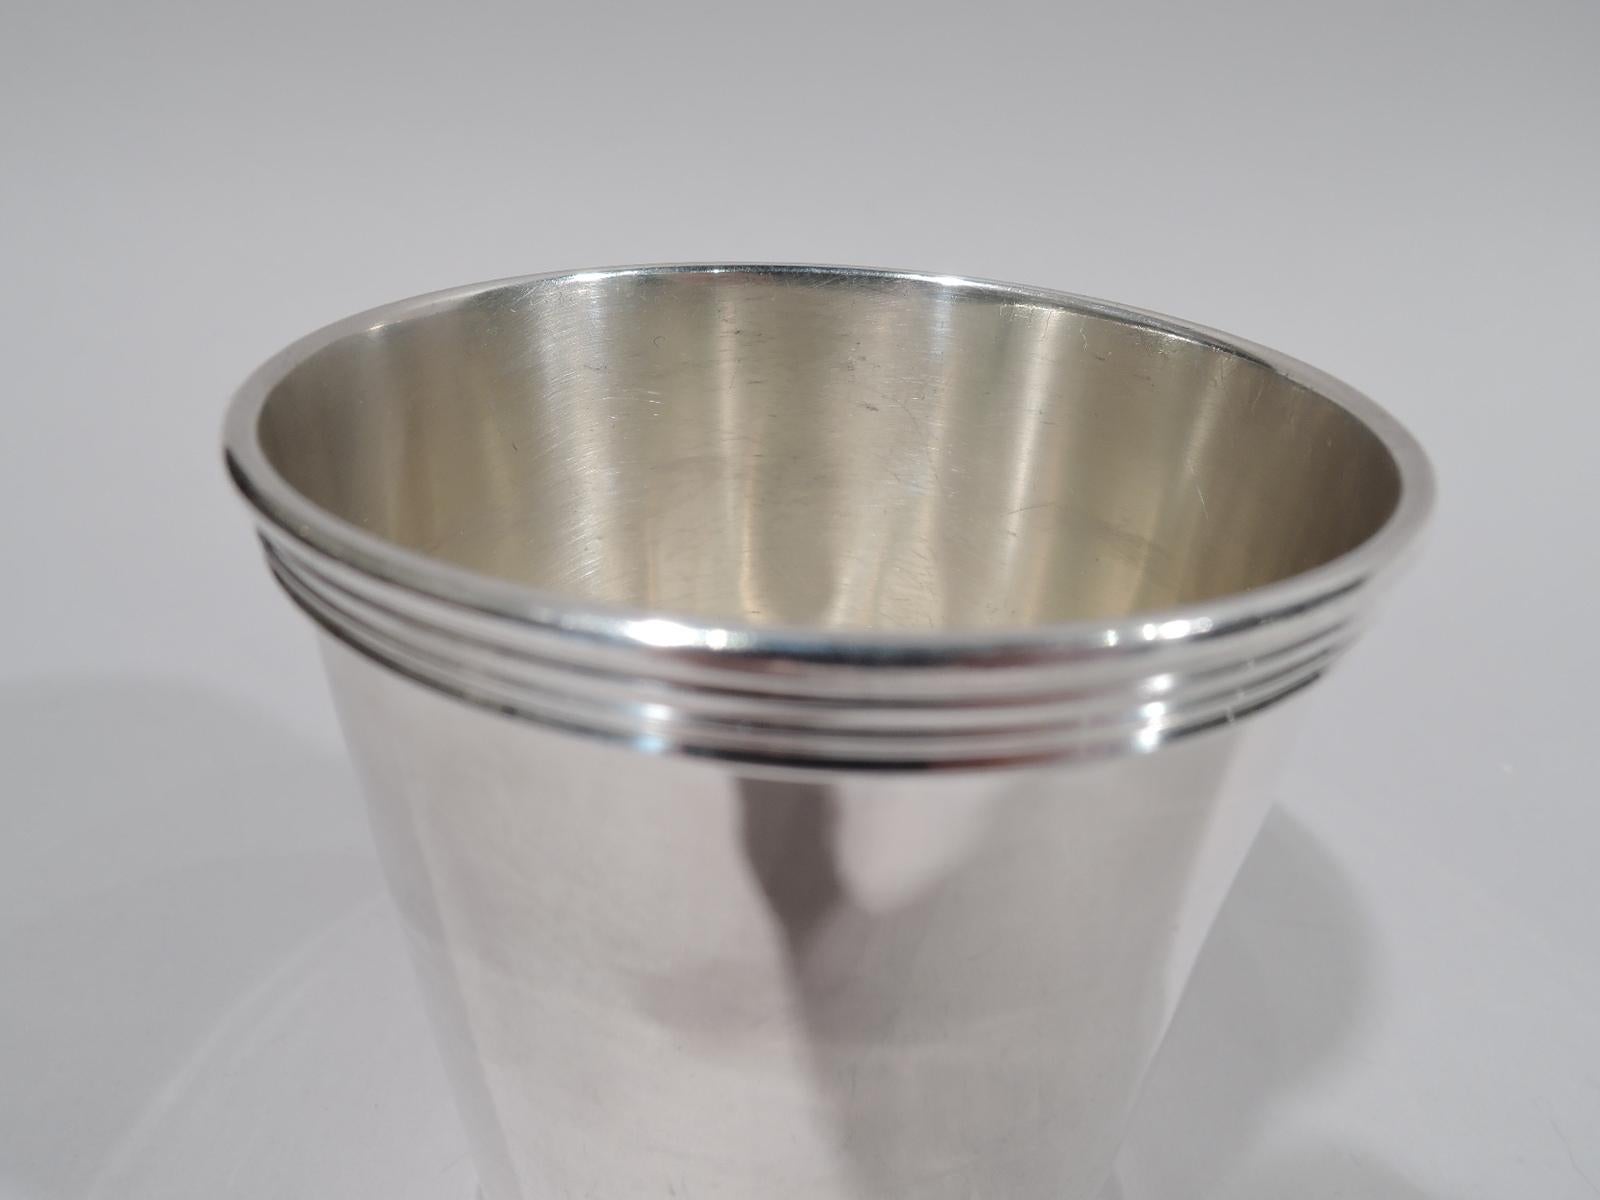 Sterling silver mint julep cup. Straight and tapering sides with reeded rim and foot. A slightly smaller version of the Classic form. Script presentation dated “Christmas 1953” engraved on underside. Marked Trees, a Lexington, Kentucky silversmith